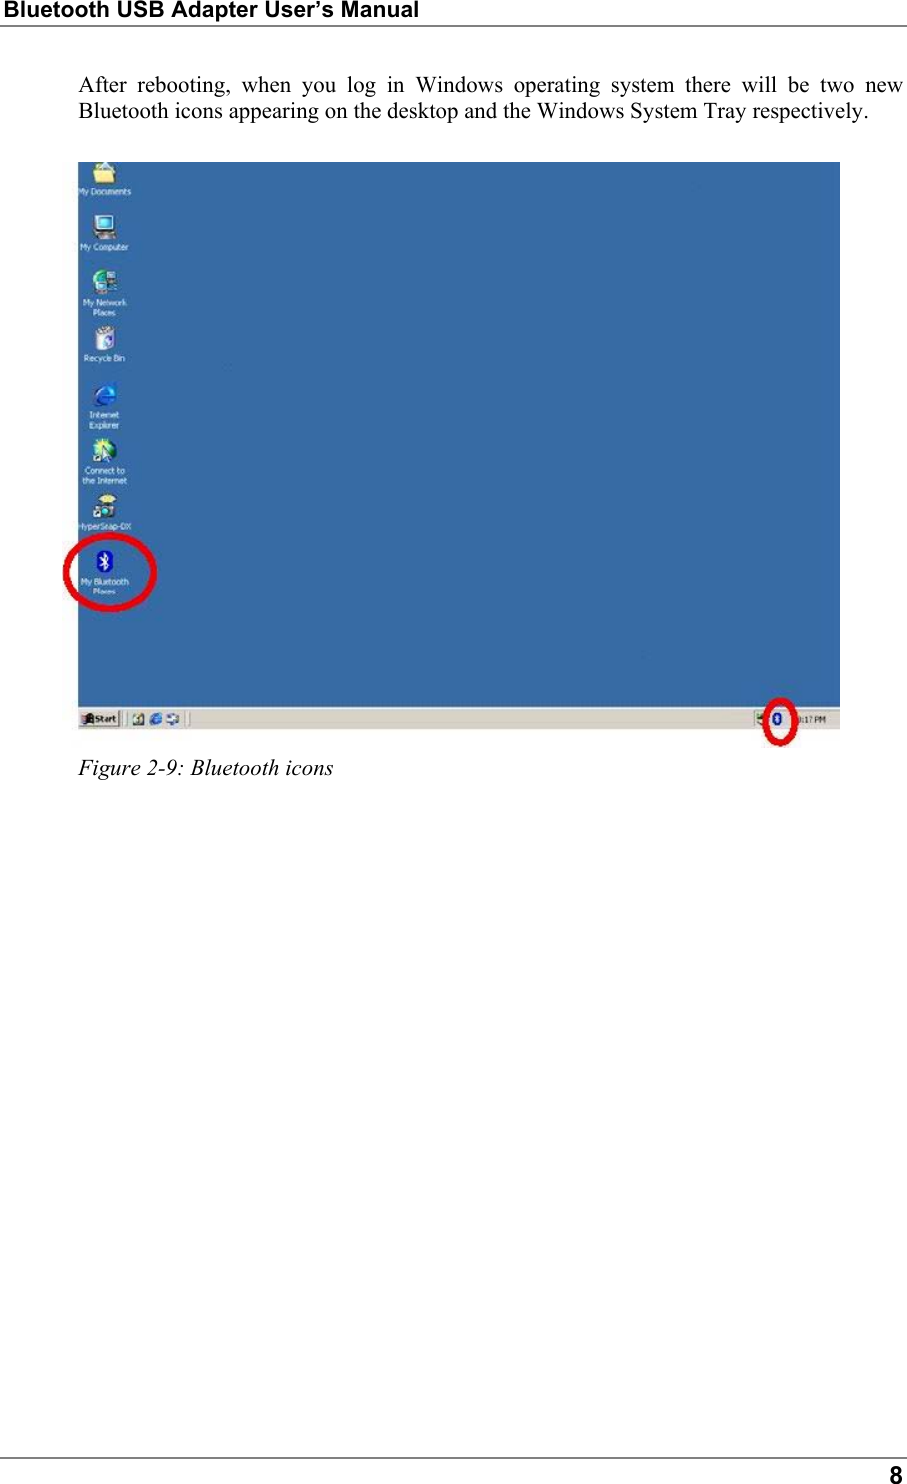 Bluetooth USB Adapter User’s Manual8After rebooting, when you log in Windows operating system there will be two newBluetooth icons appearing on the desktop and the Windows System Tray respectively.Figure 2-9: Bluetooth icons